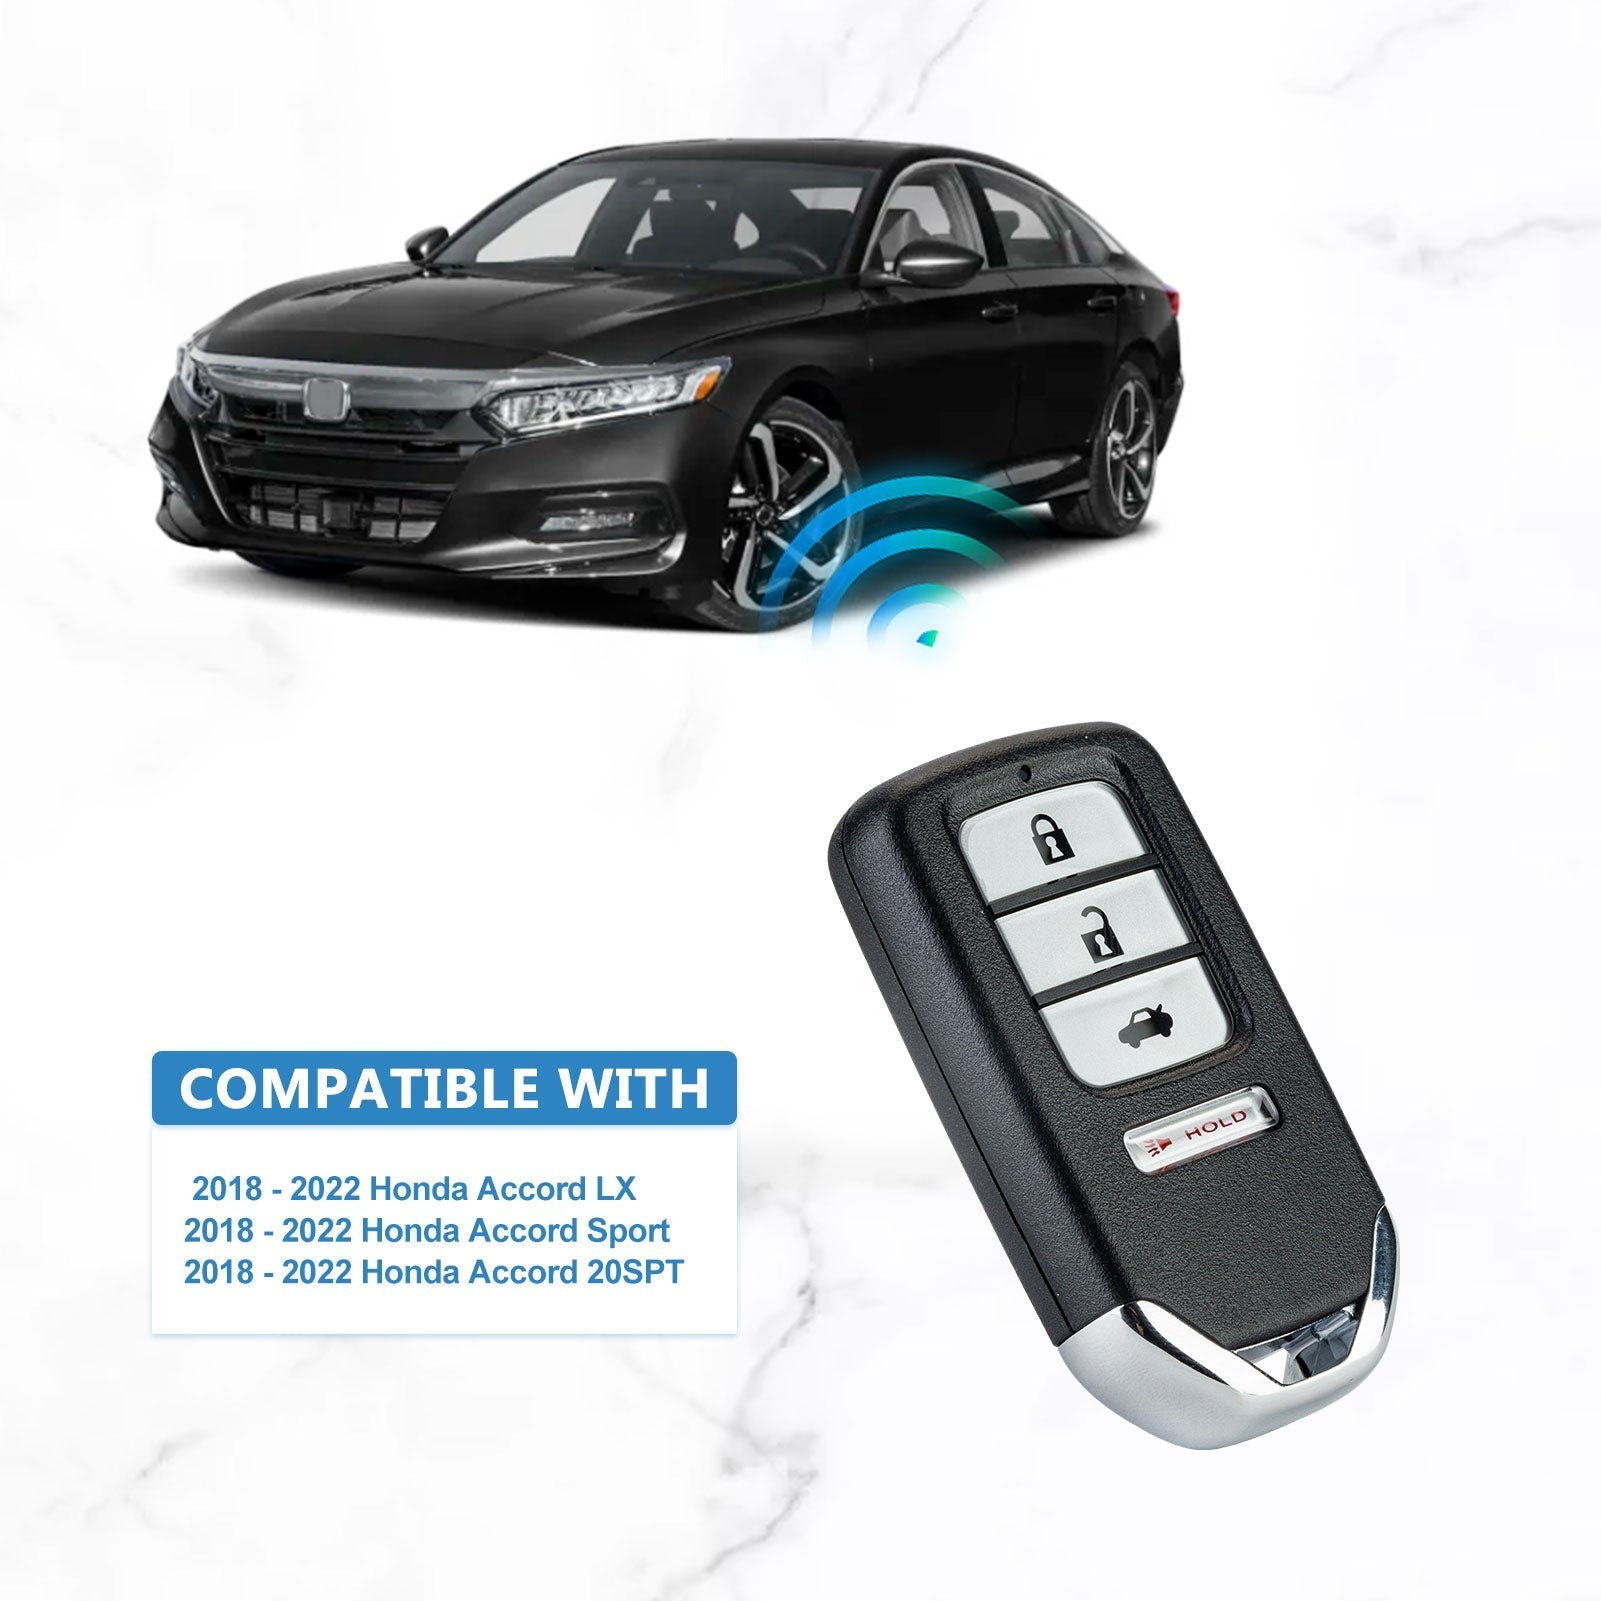 433MHZ Repalcement for 2018-2021 Honda Accord LX LX-S Sport 4A Chip Smart Remote Key Fob 72147-TVA-A11  KR-H4RH-10